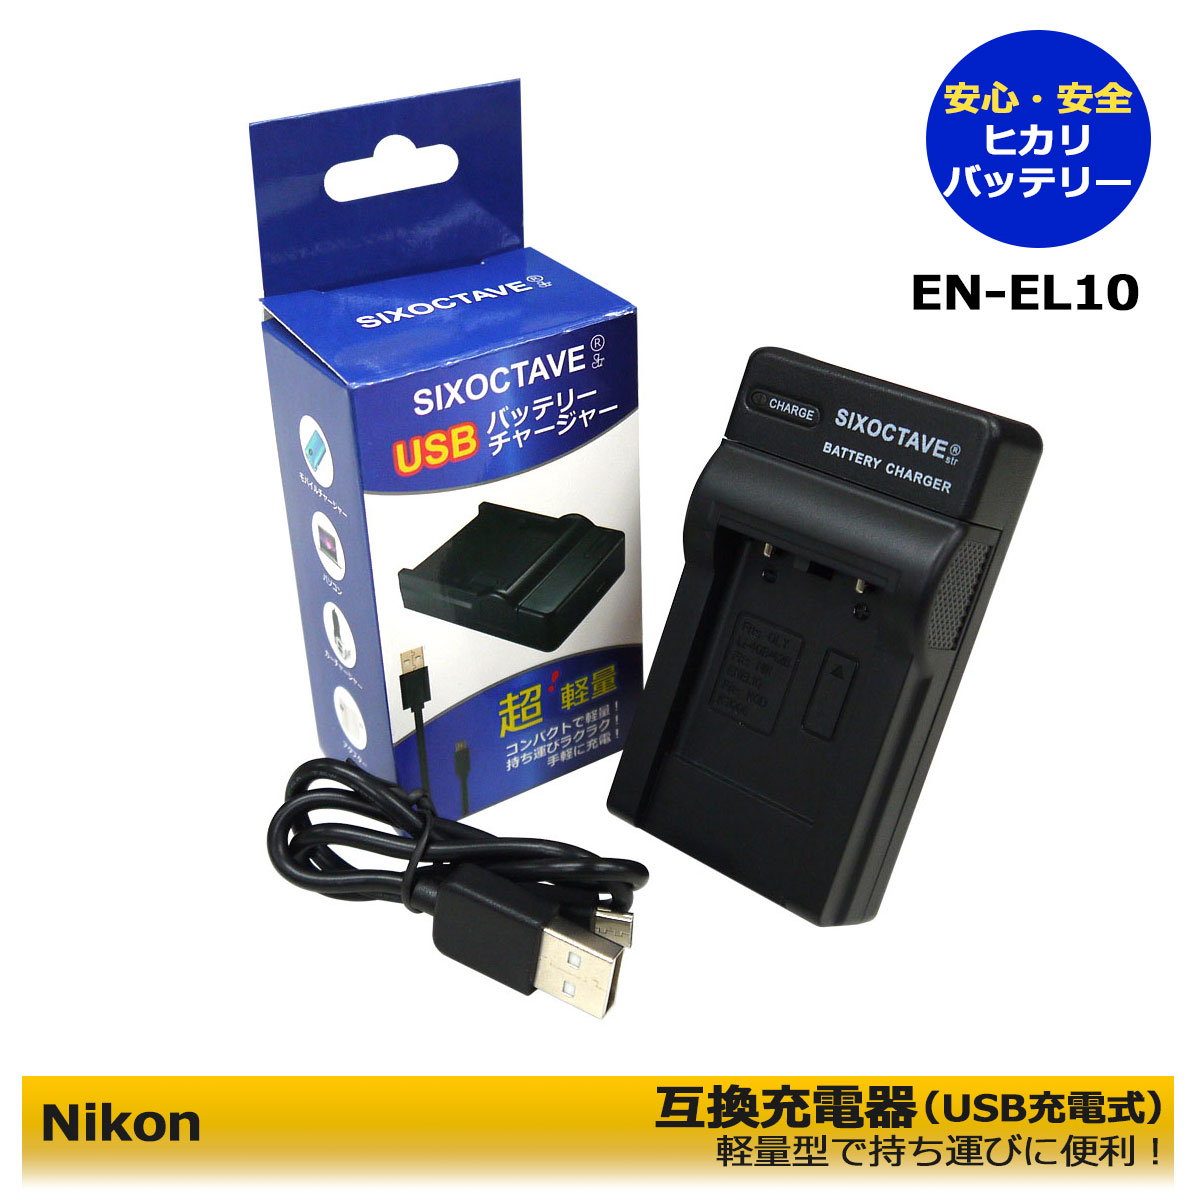 NikonڤбEN-EL10ߴŴ(USBżCoolpix S200 / Coolpix S203 / Coolpi...